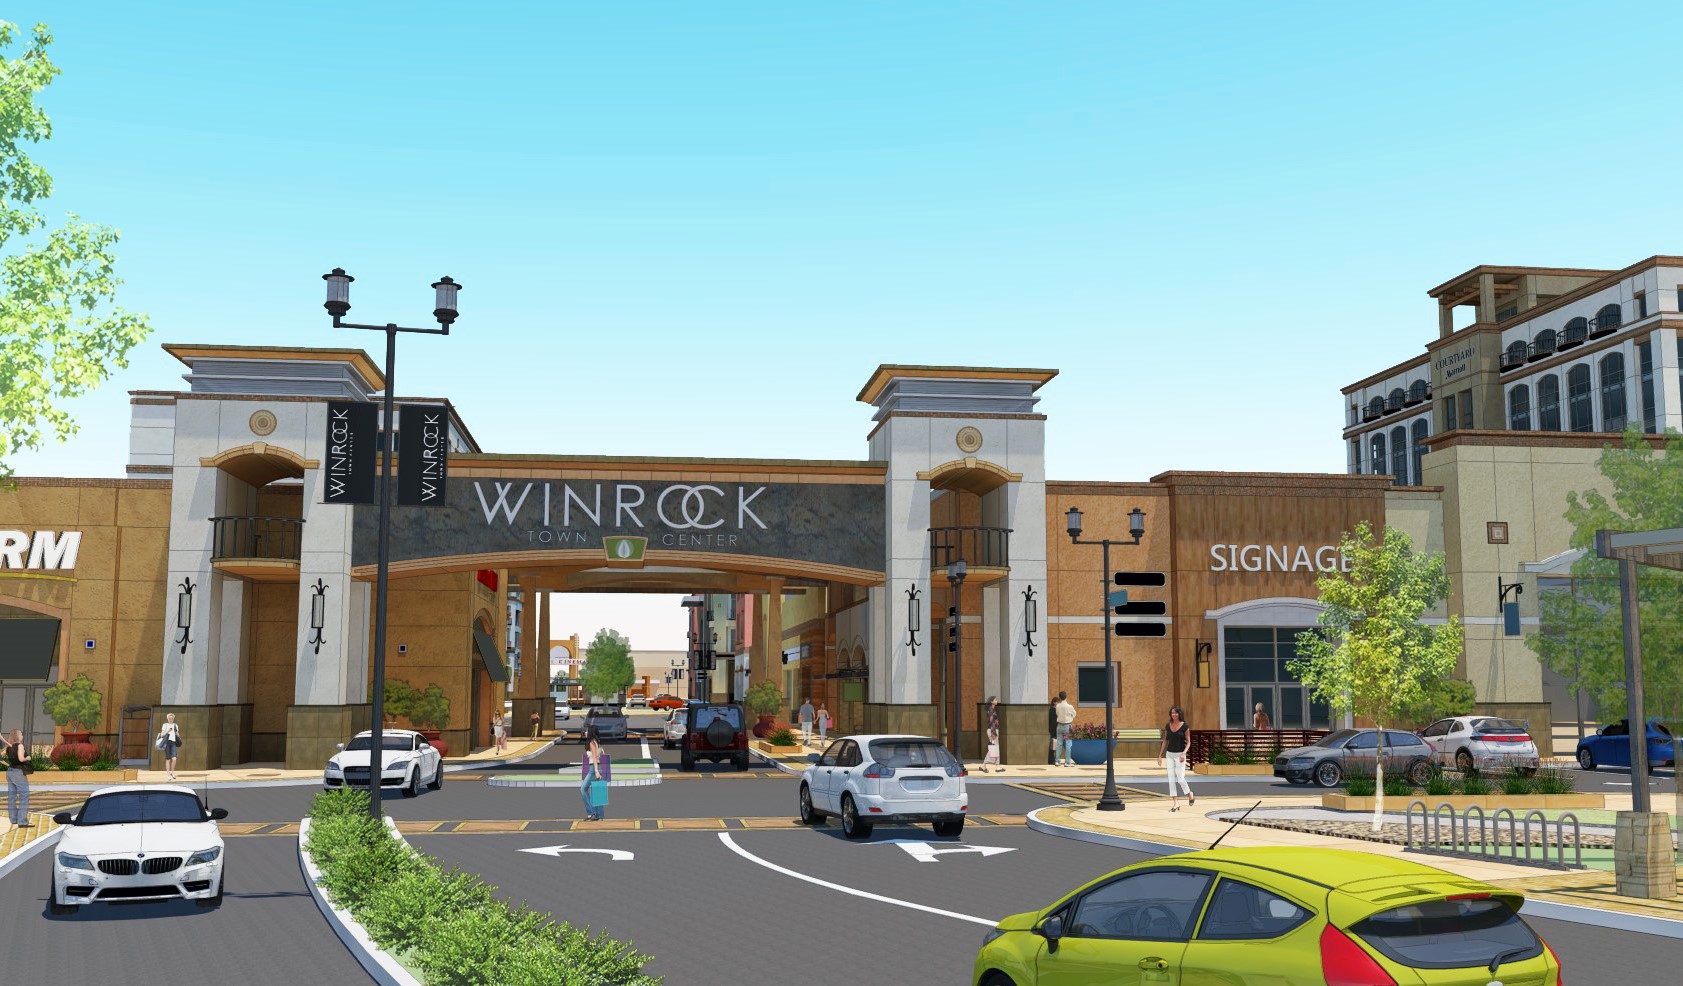 Featured image for “A Sense of Arrival at Winrock Town Center”